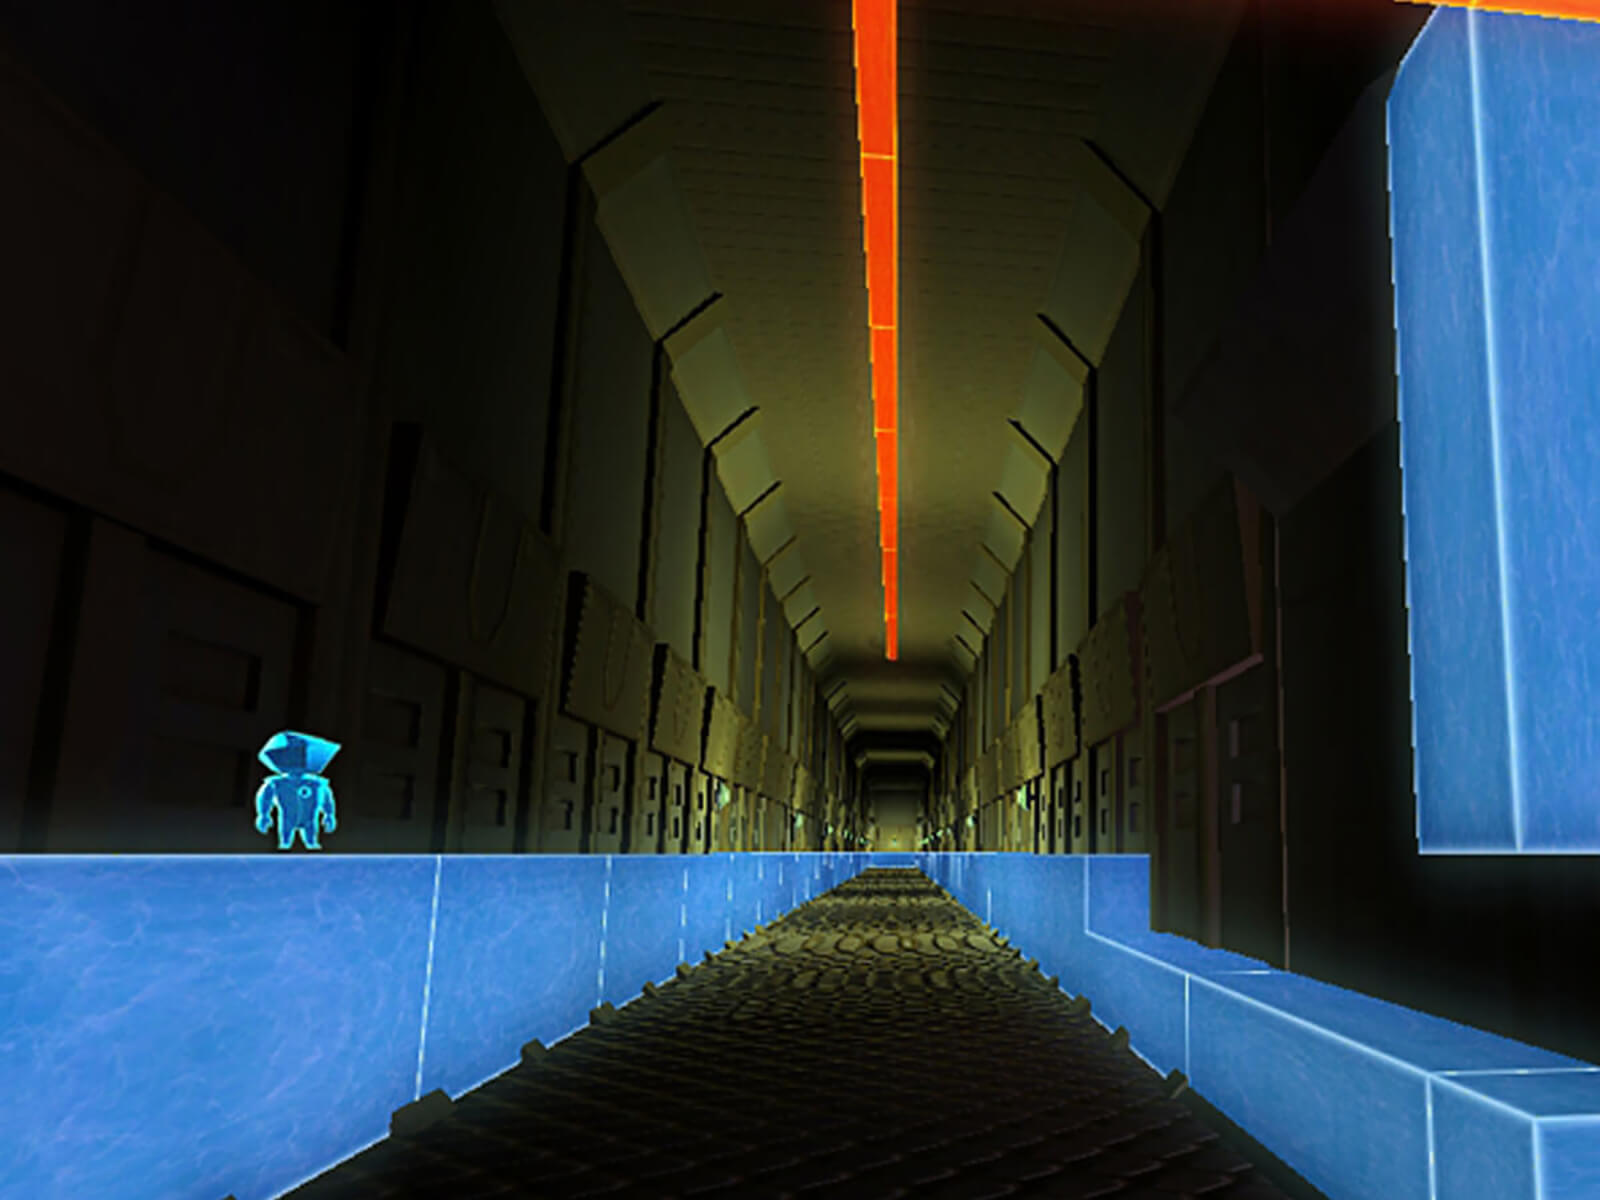 The player's avatar stands atop blue blocks running the length of a long metallic hallway